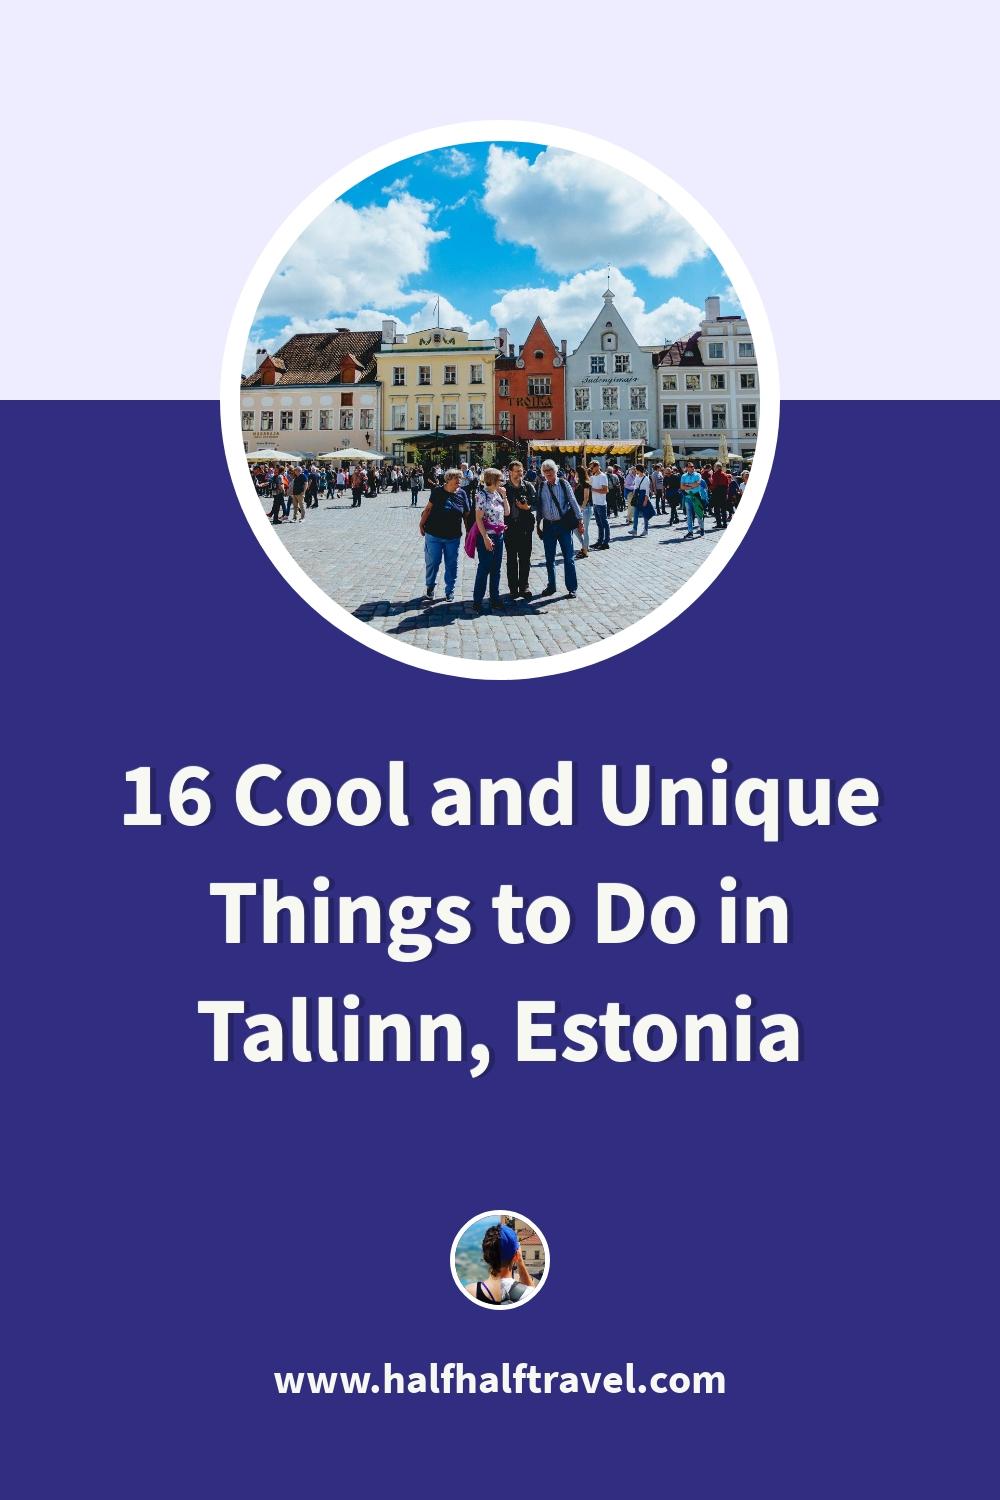 Pinterest image from the '16 Cool and Unique Things to Do in Tallinn, Estonia' article on Half Half Travel